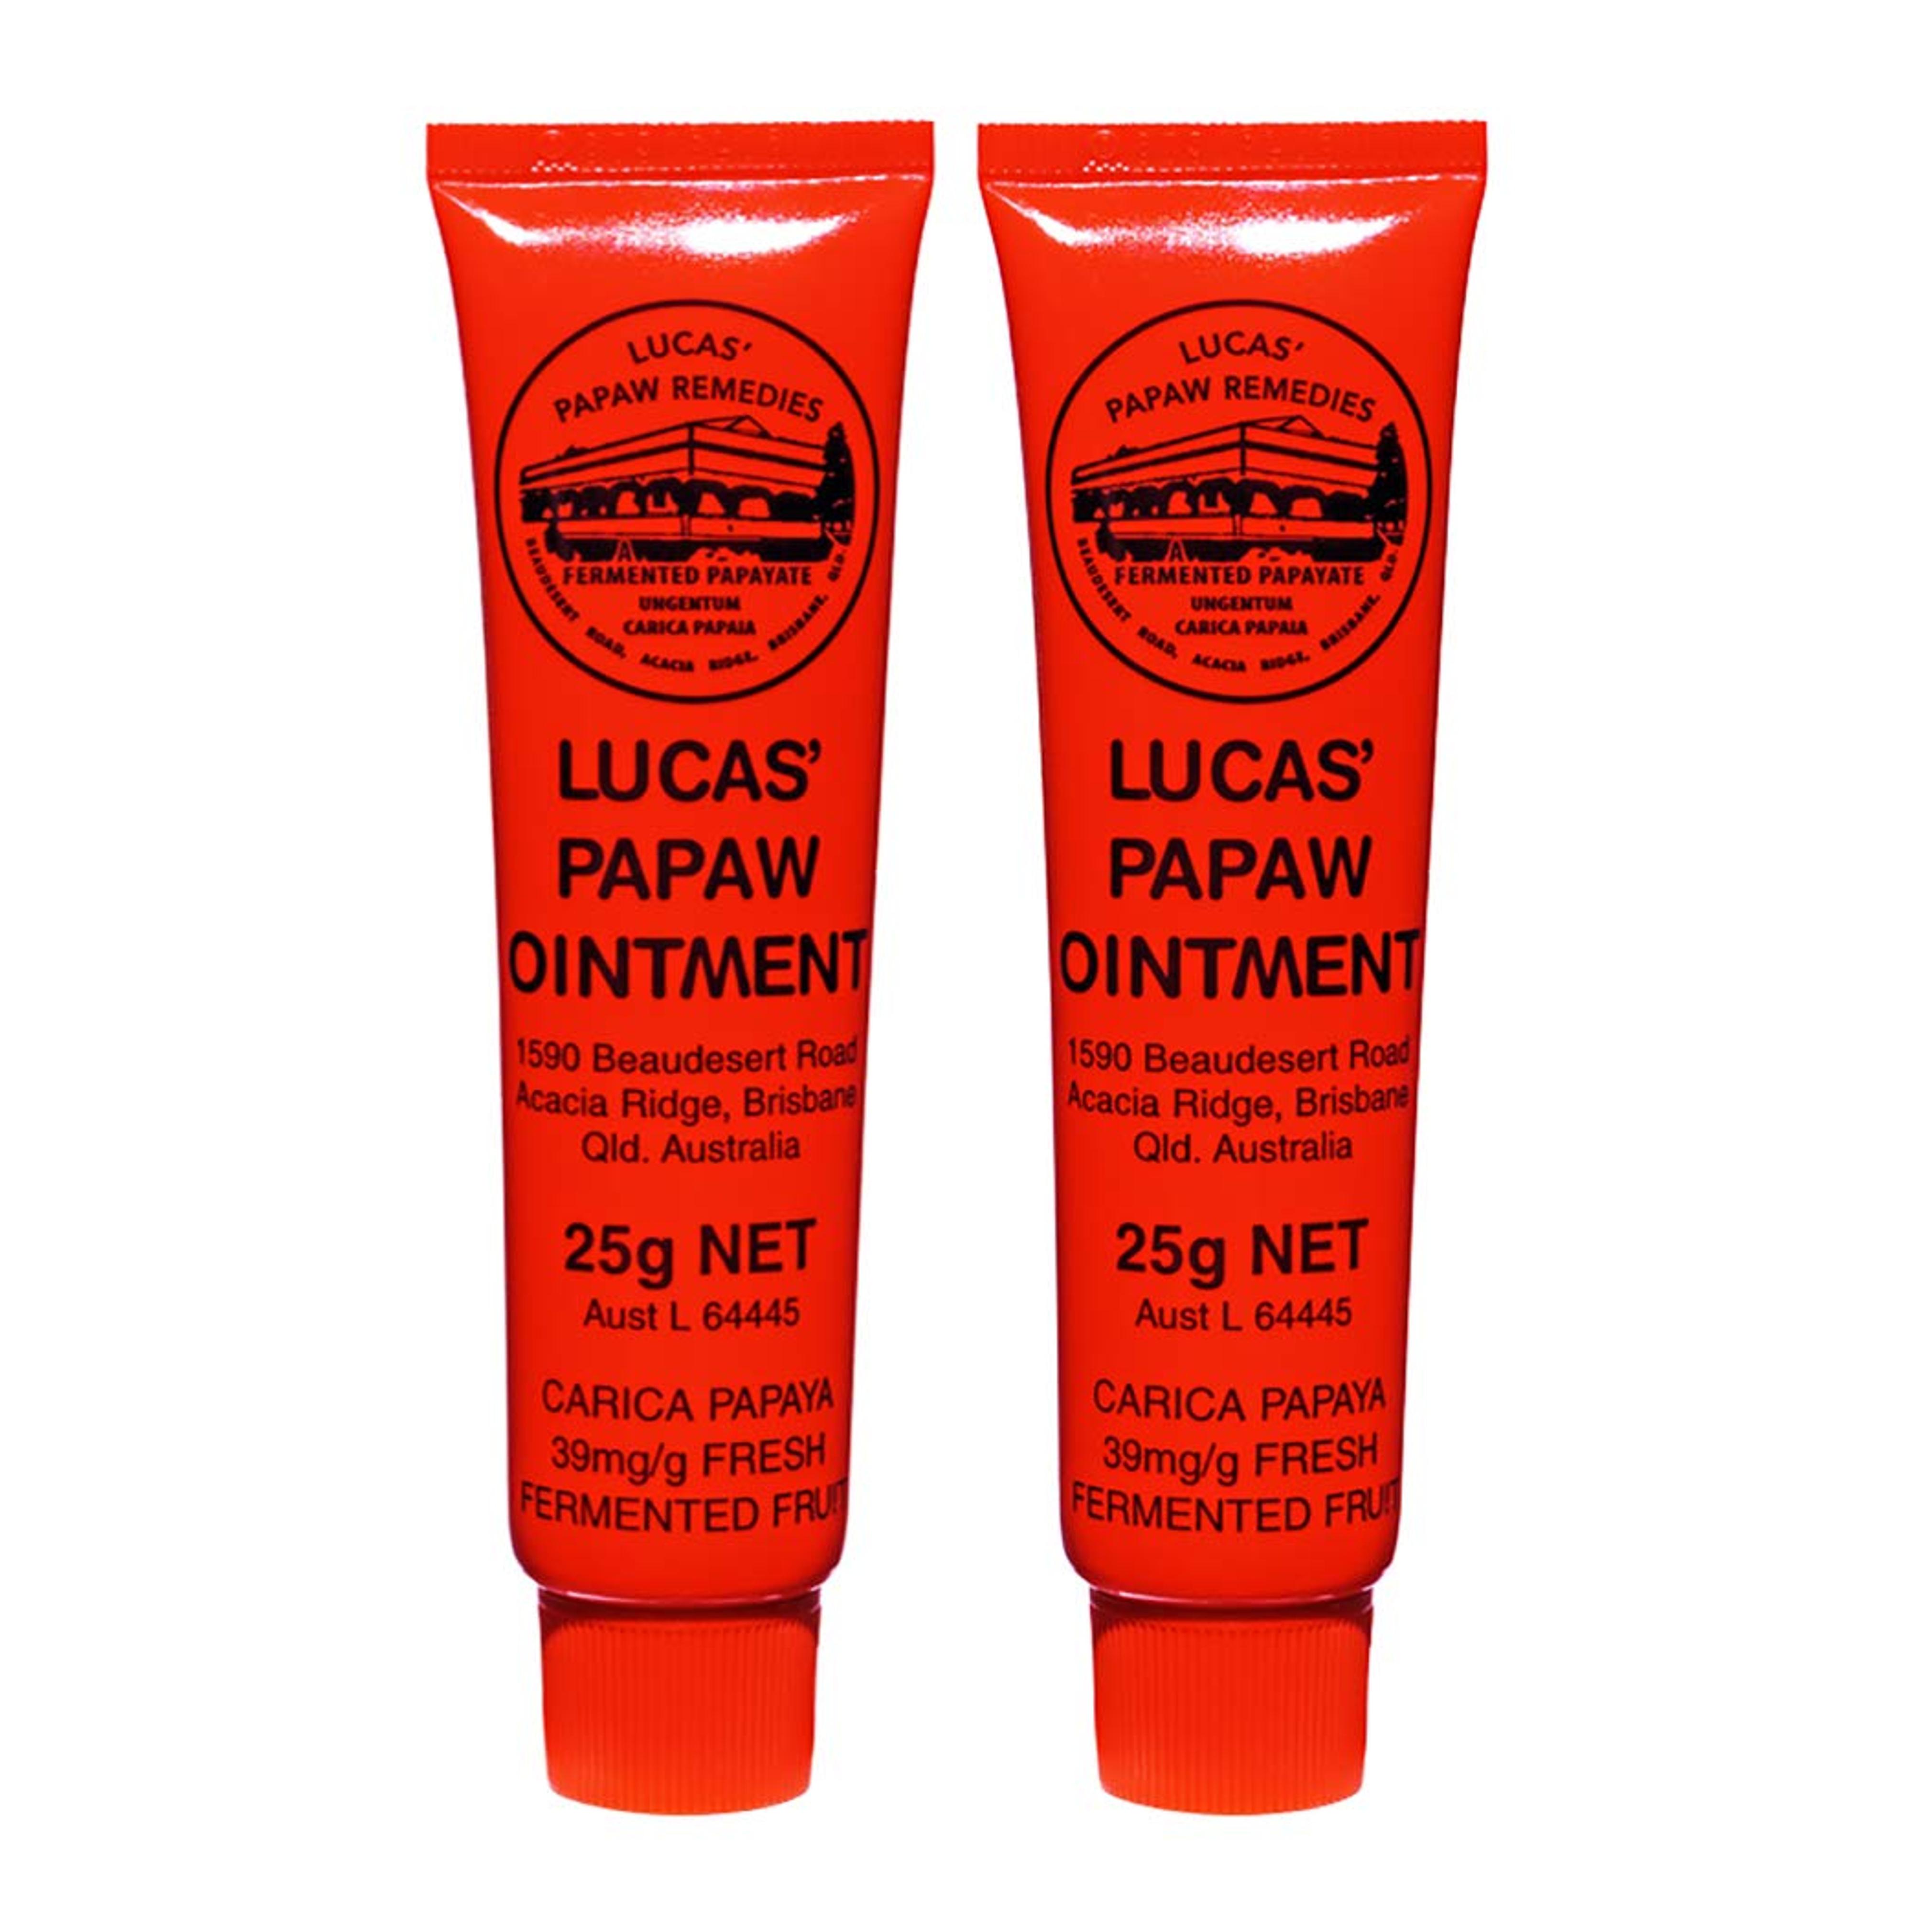 Amazon.com: Lucas Papaw Ointment 25g Tube - TWIN Pack for value : Health & Household